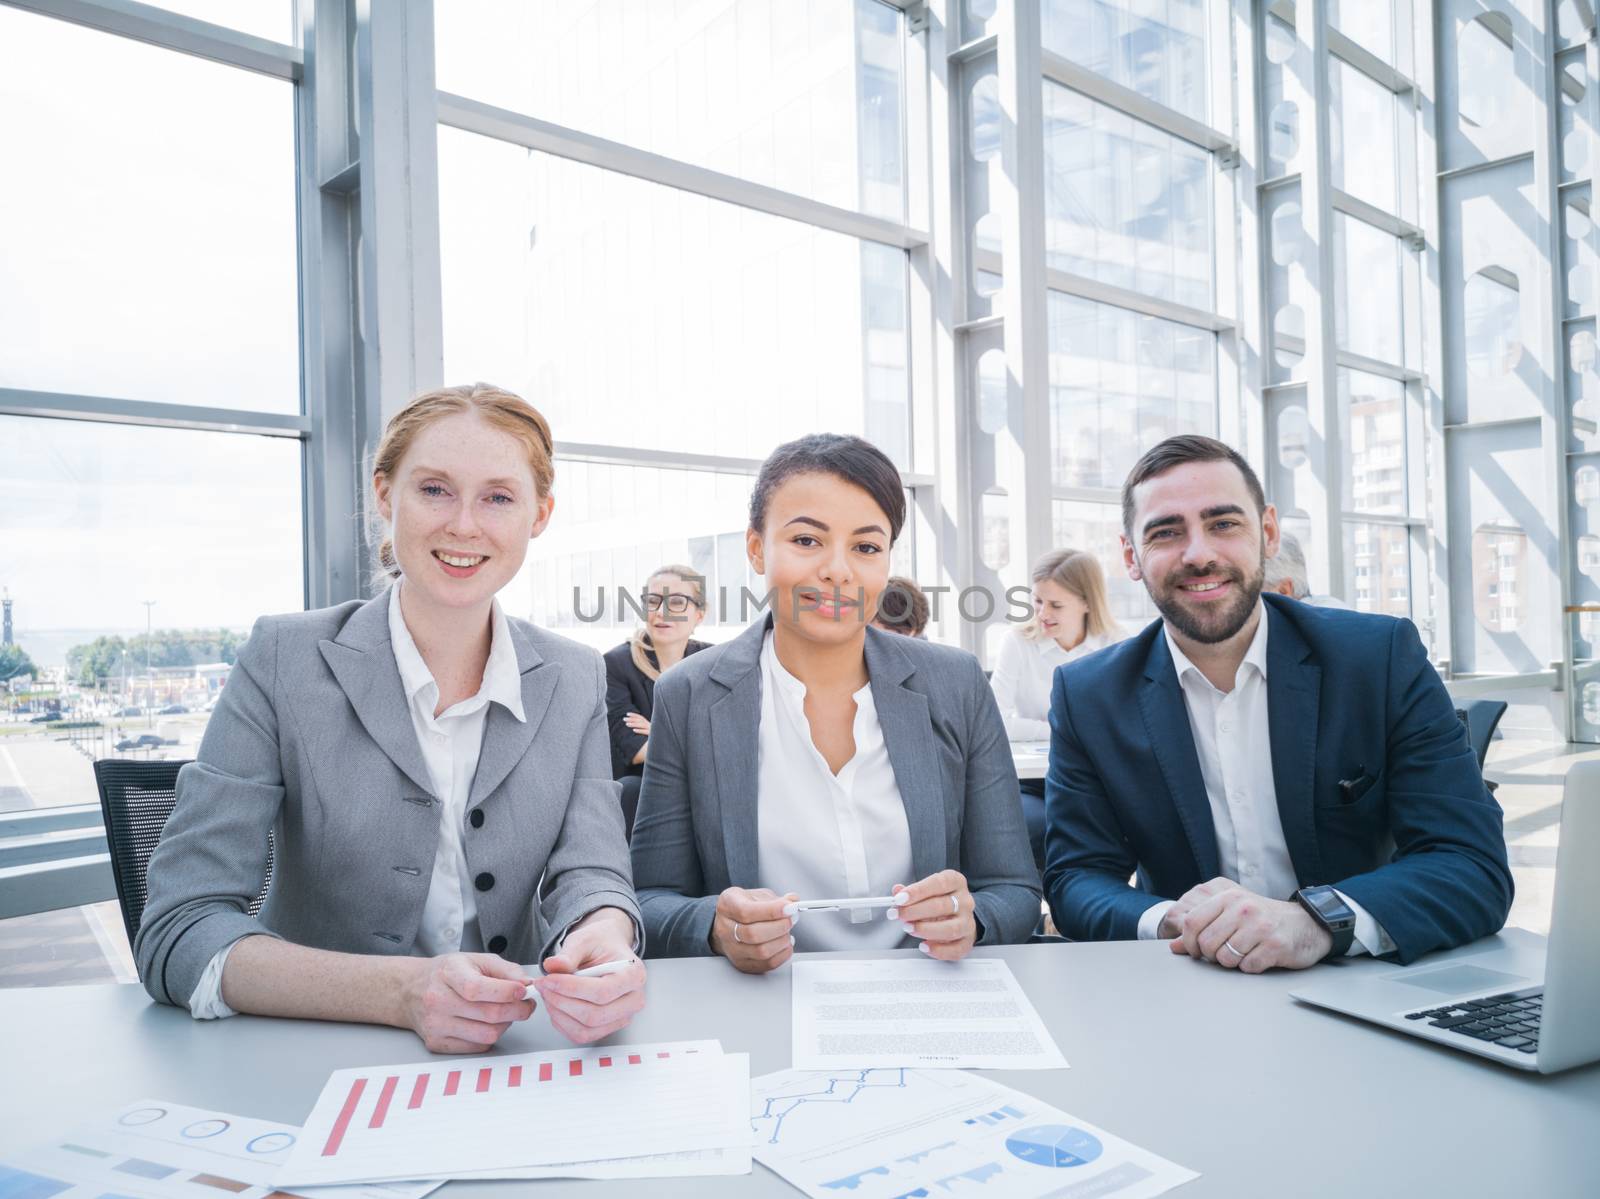 Three smiling business people at conference table with reports. Business meeting and communication concept